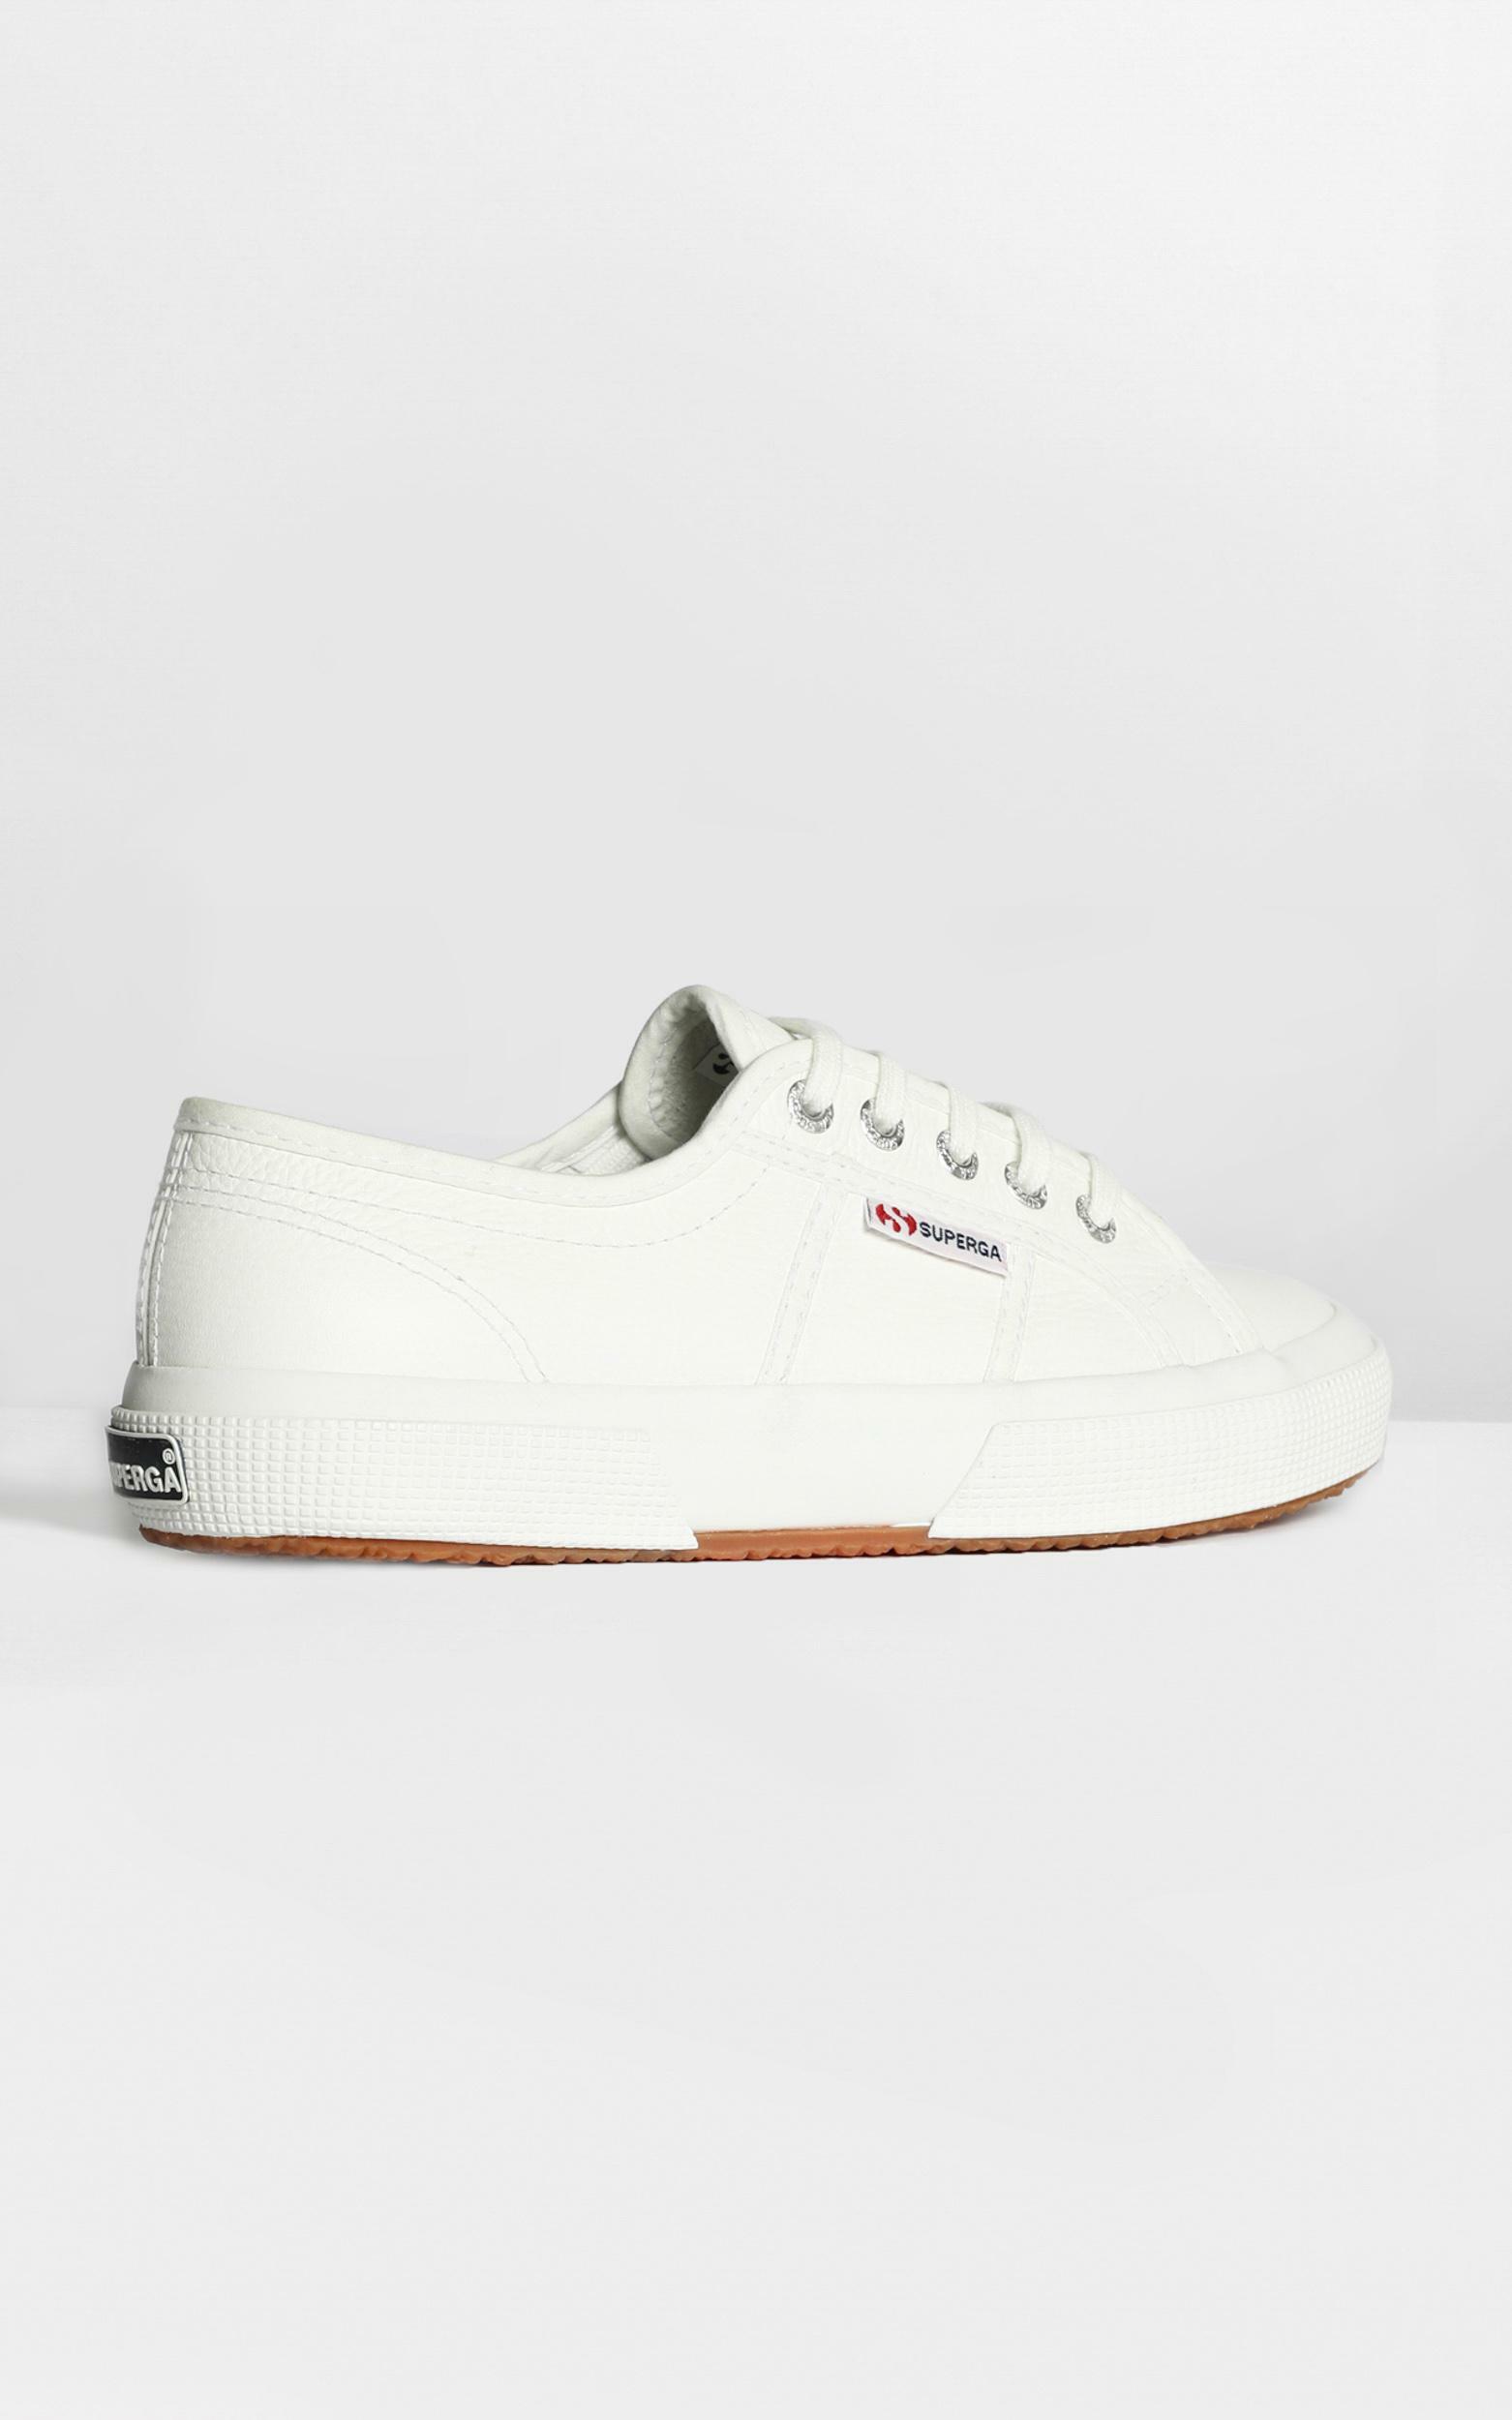 Superga - 2750 EFGLU Sneaker in White Leather - 05, WHT1, hi-res image number null